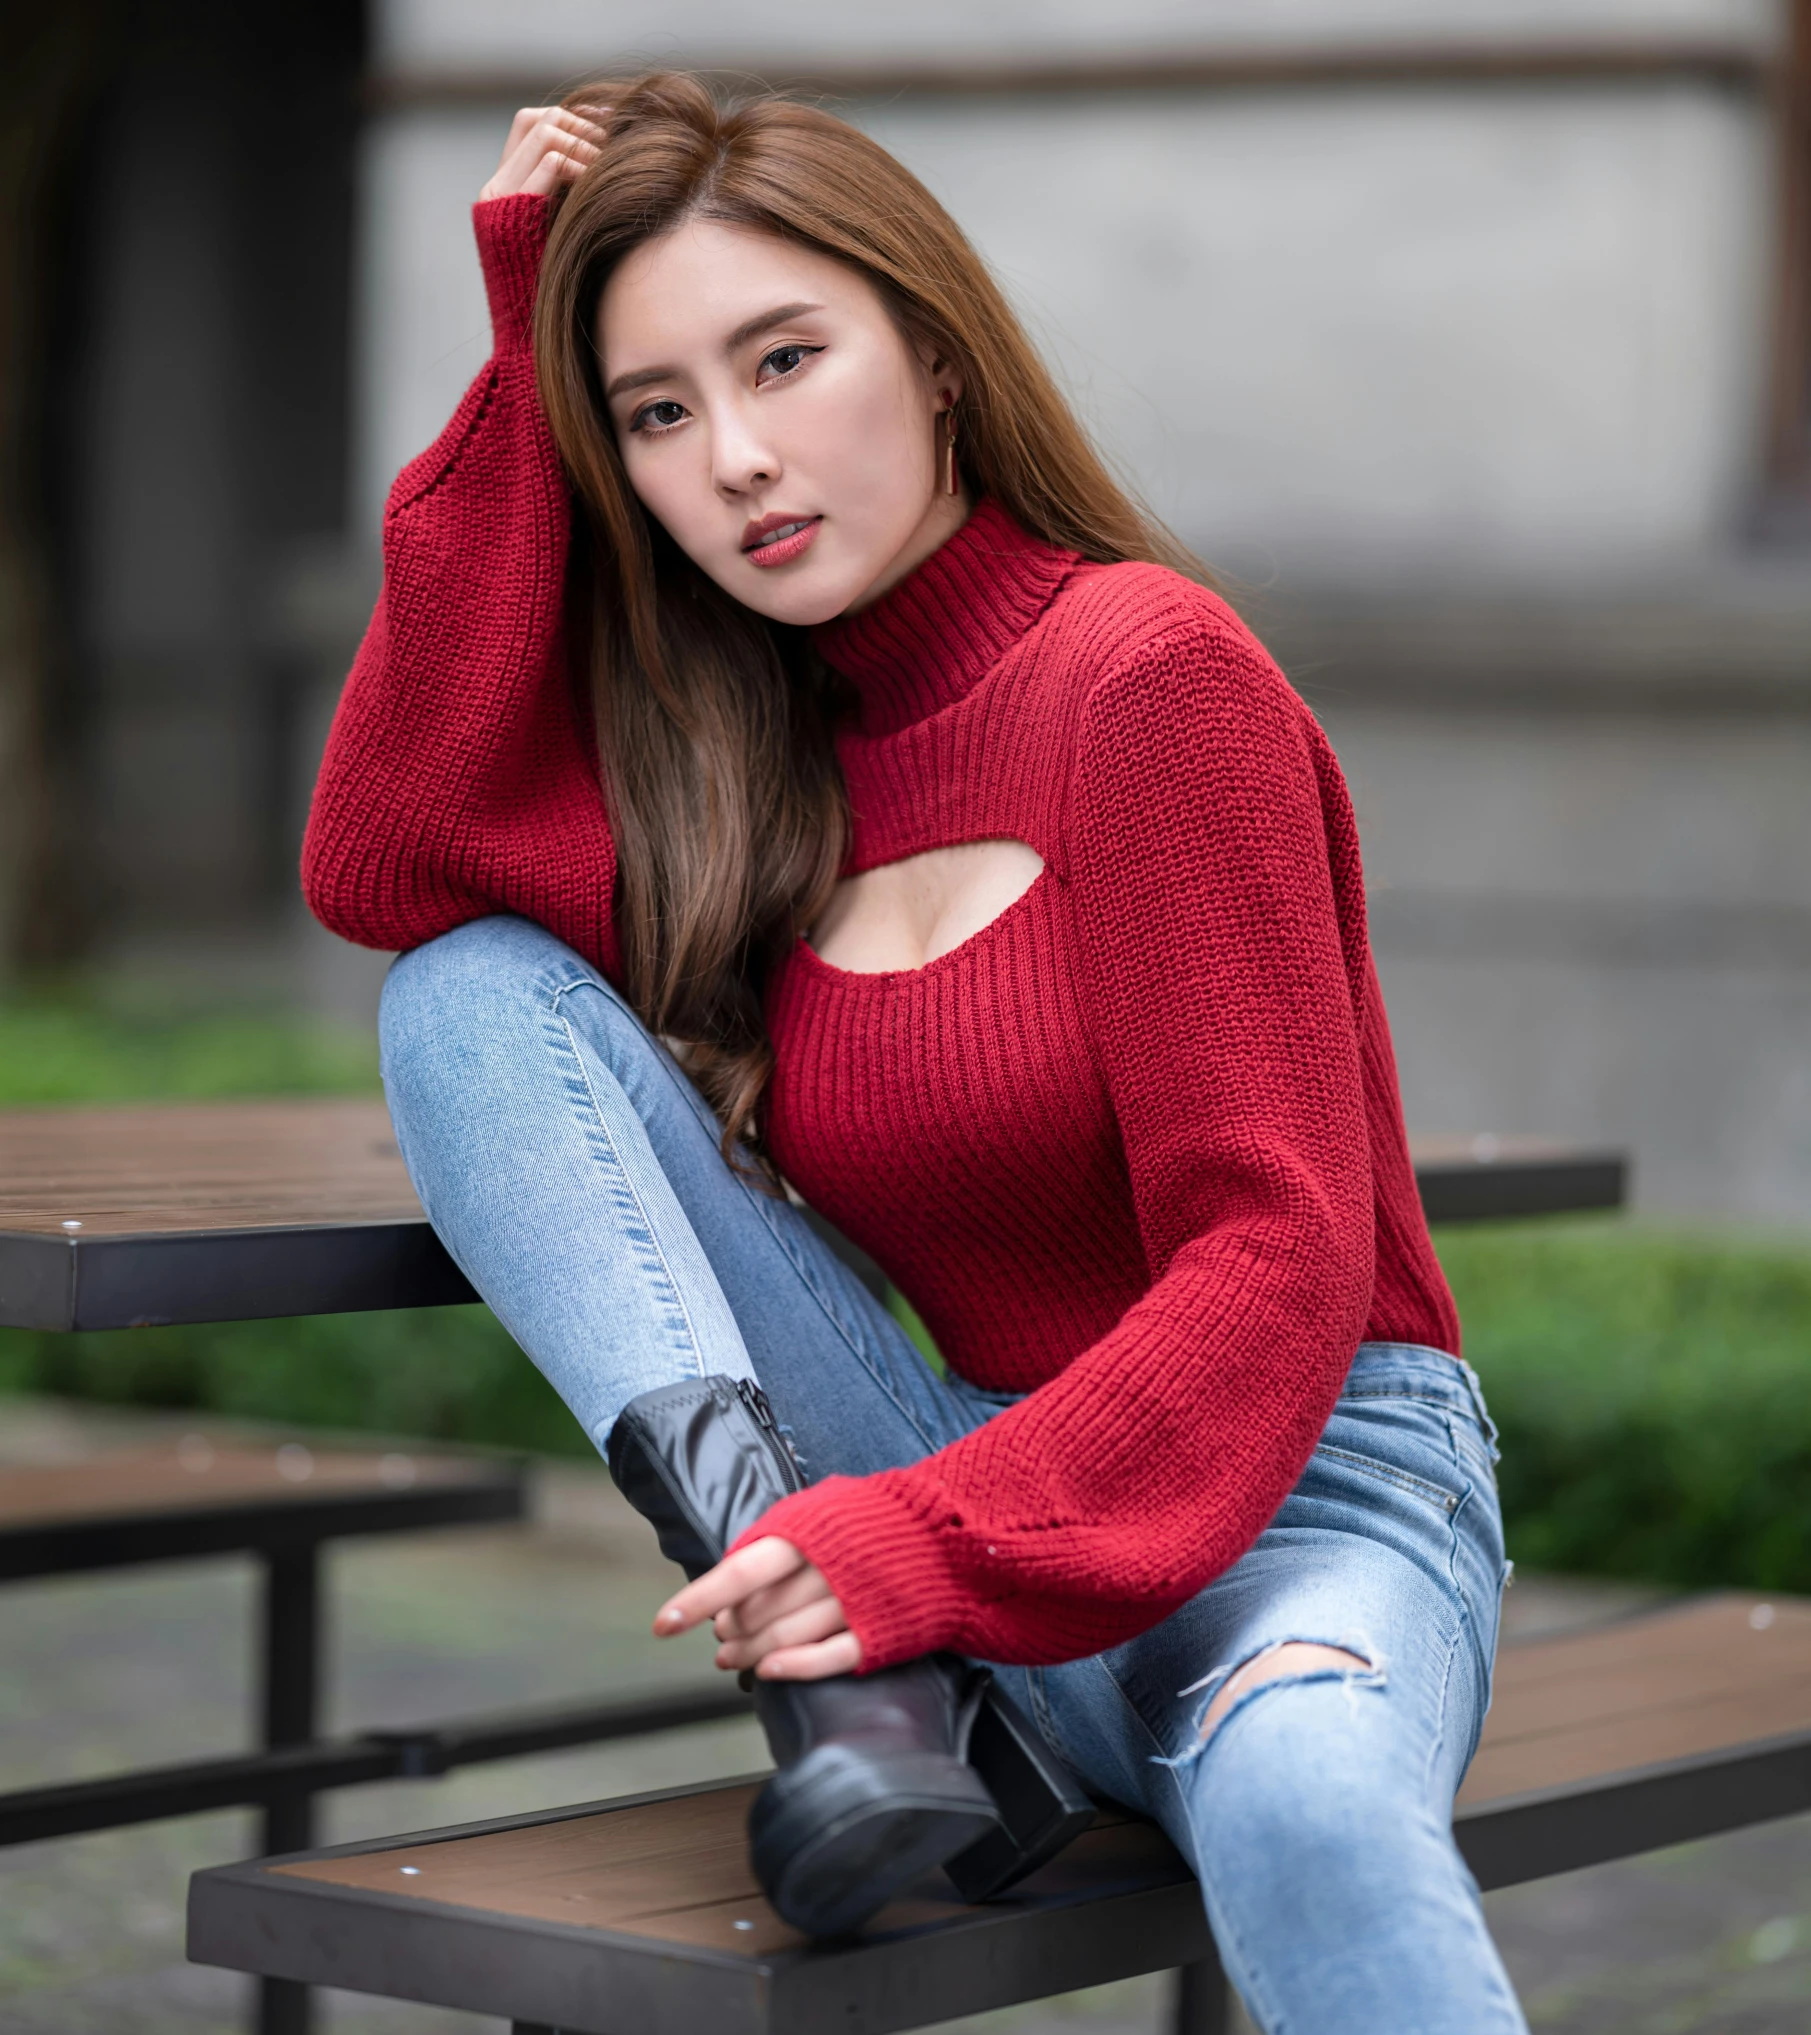 a woman sits on a bench wearing a red sweater